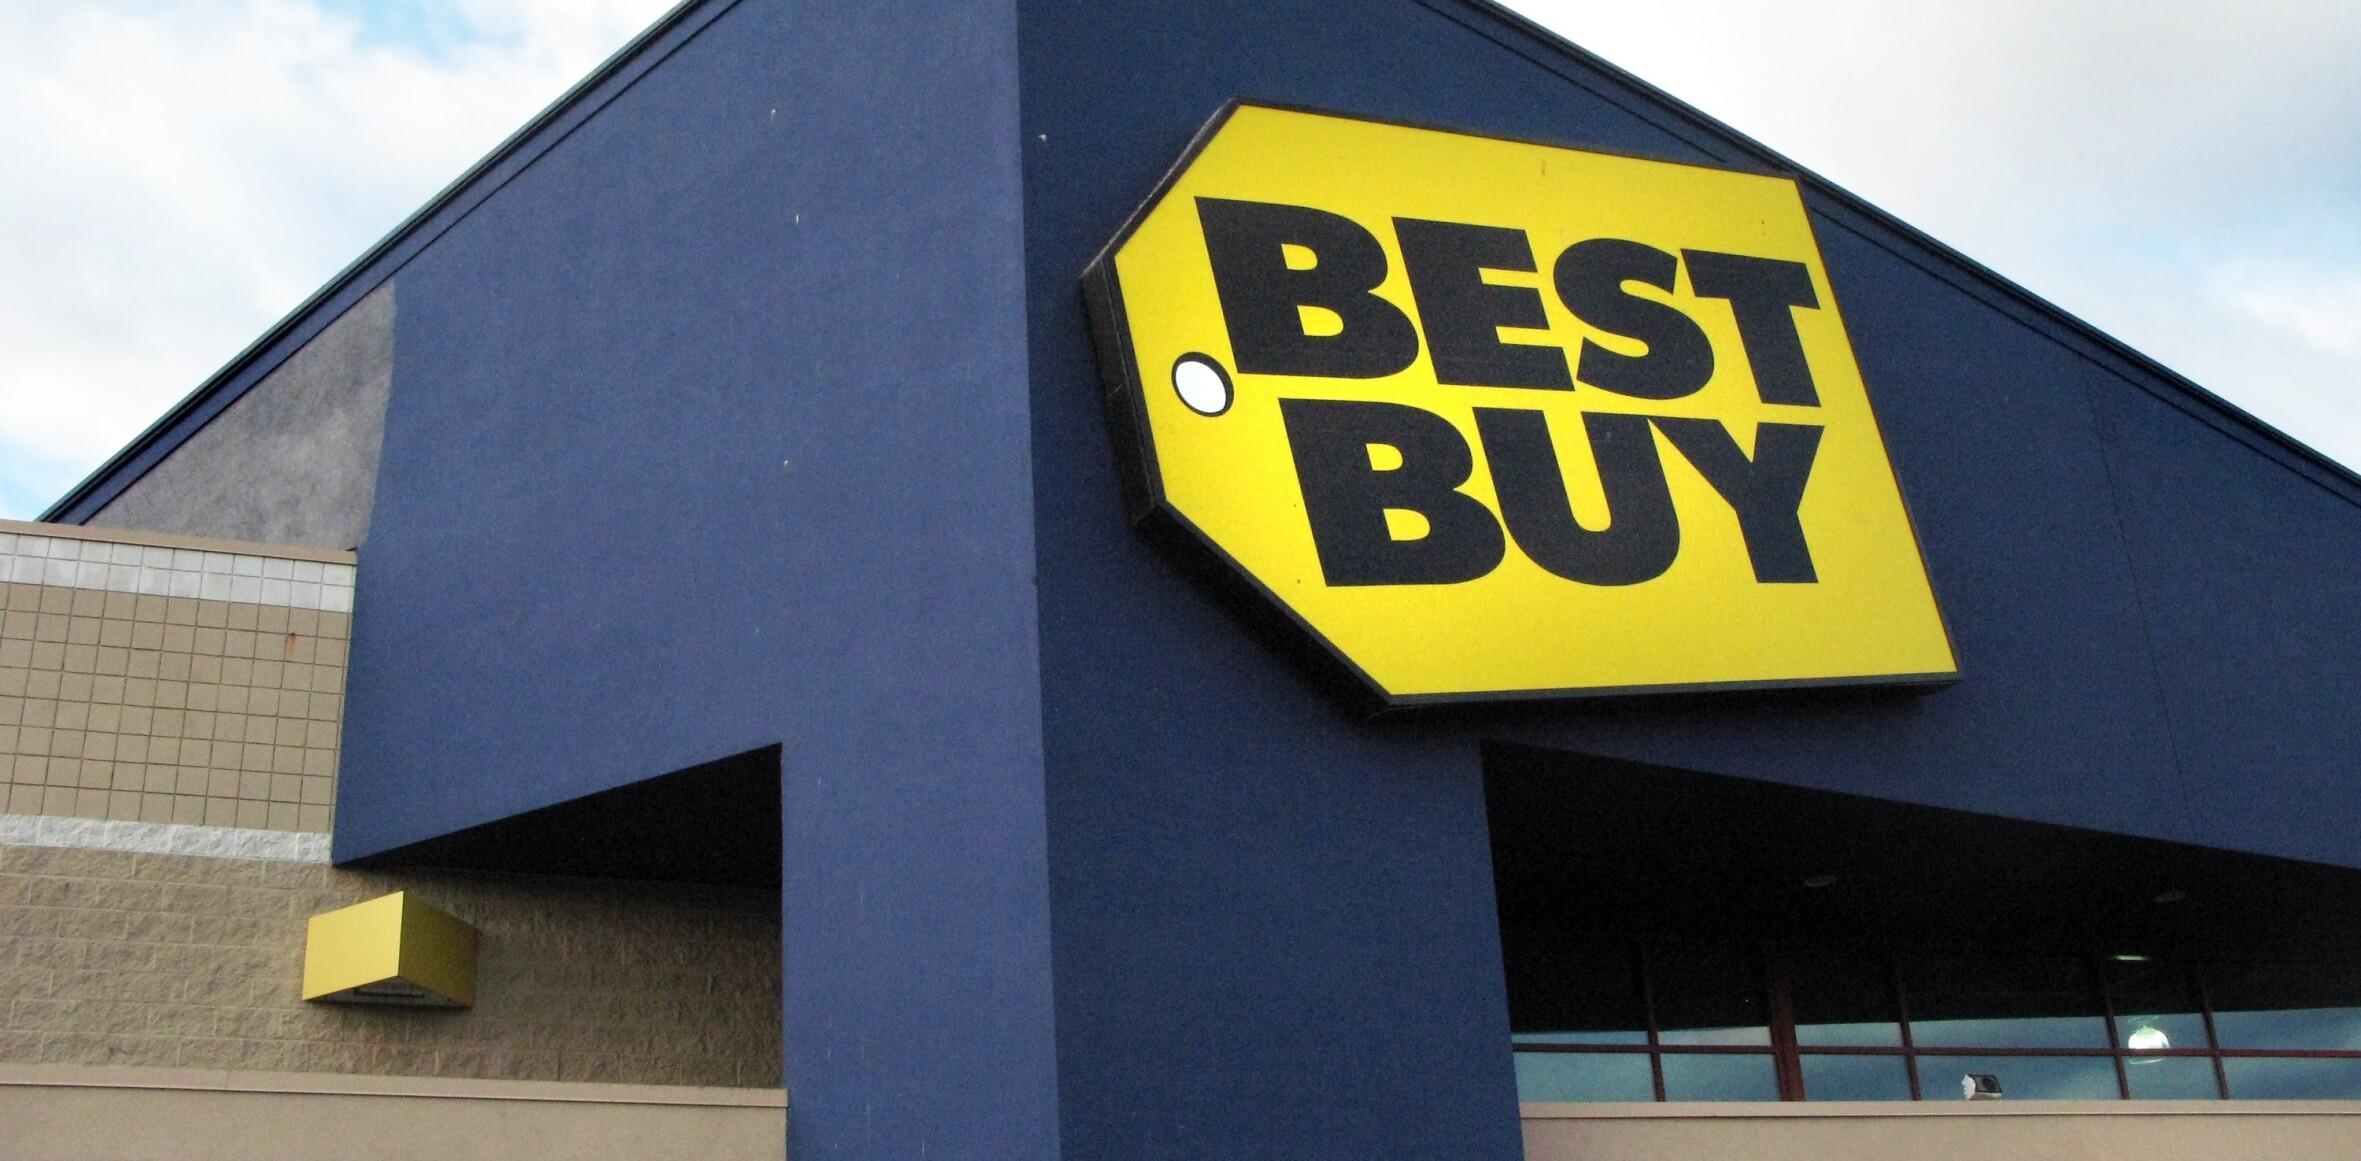 Best Buy employees gift Wii U to teen that played store’s demo console every day